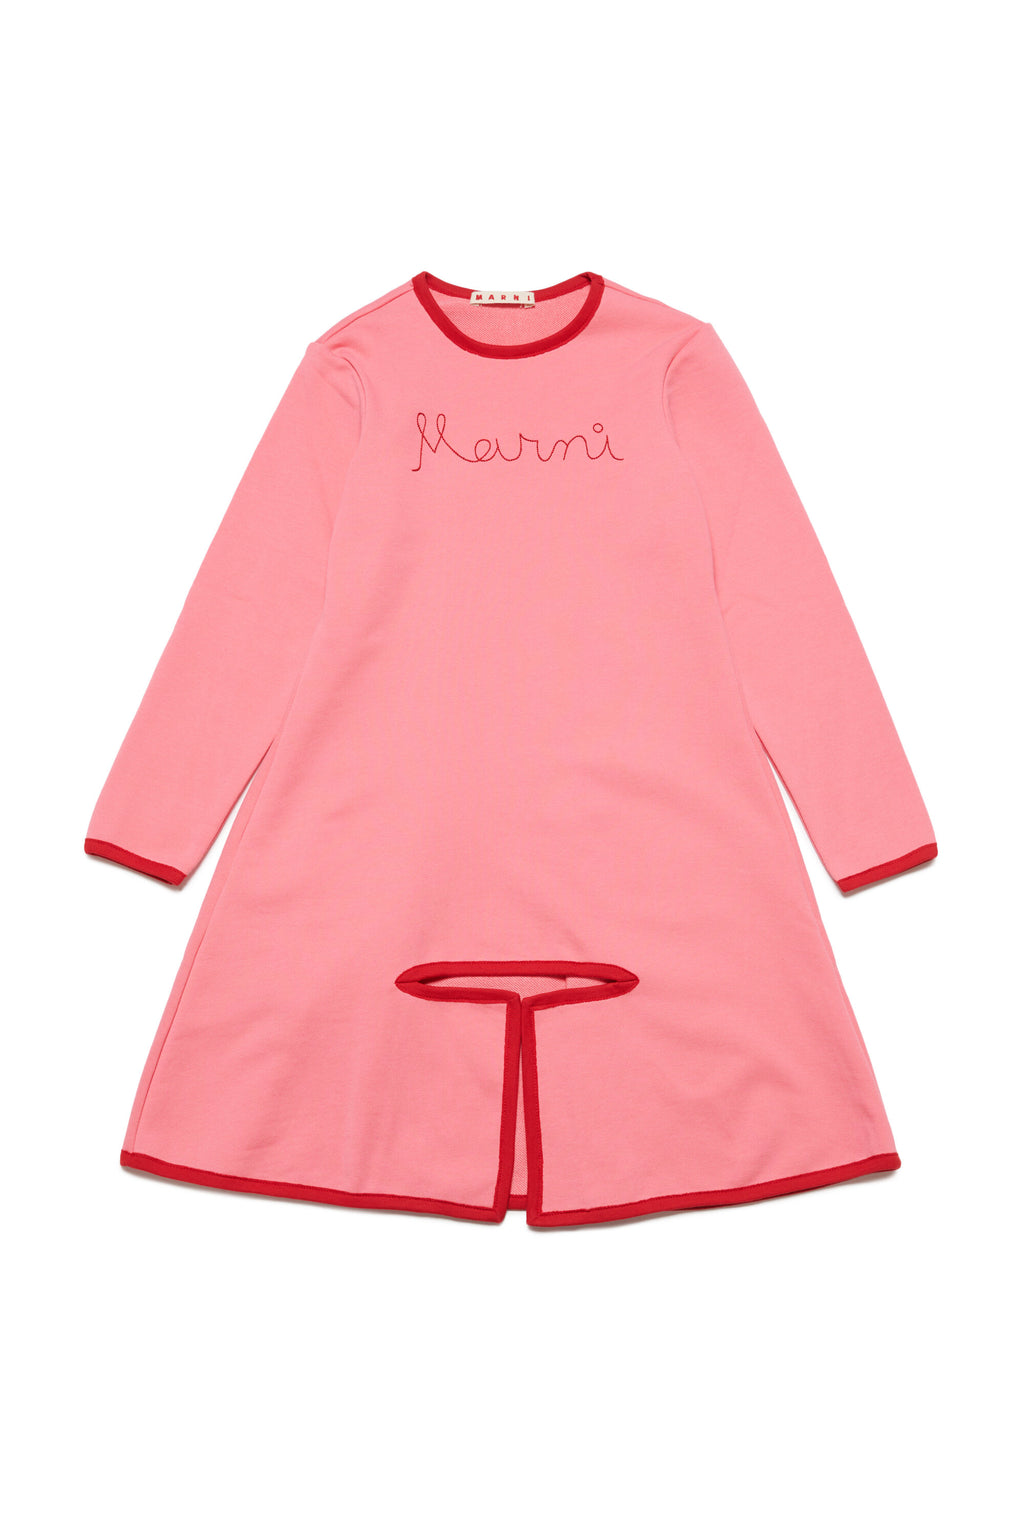 Dress in fleece with skirt with bottom opening and logo